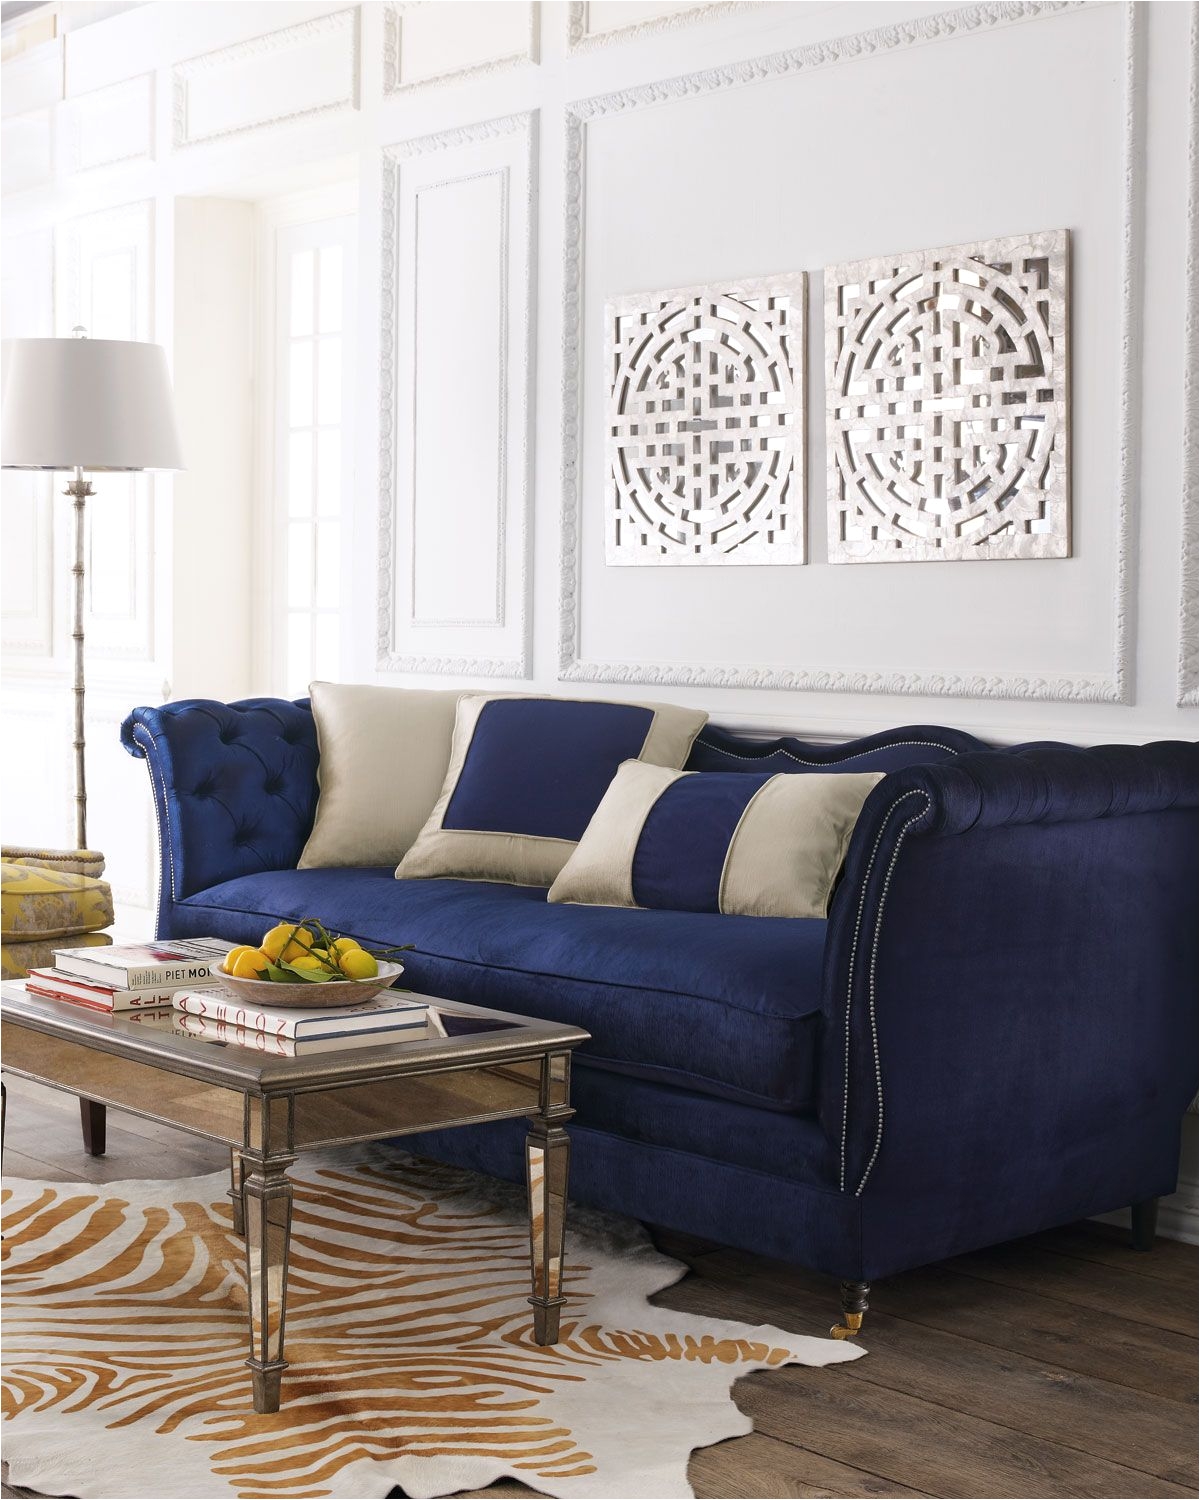 horton navy velvet sofa by haute house at neiman marcus amazing couch need want must have